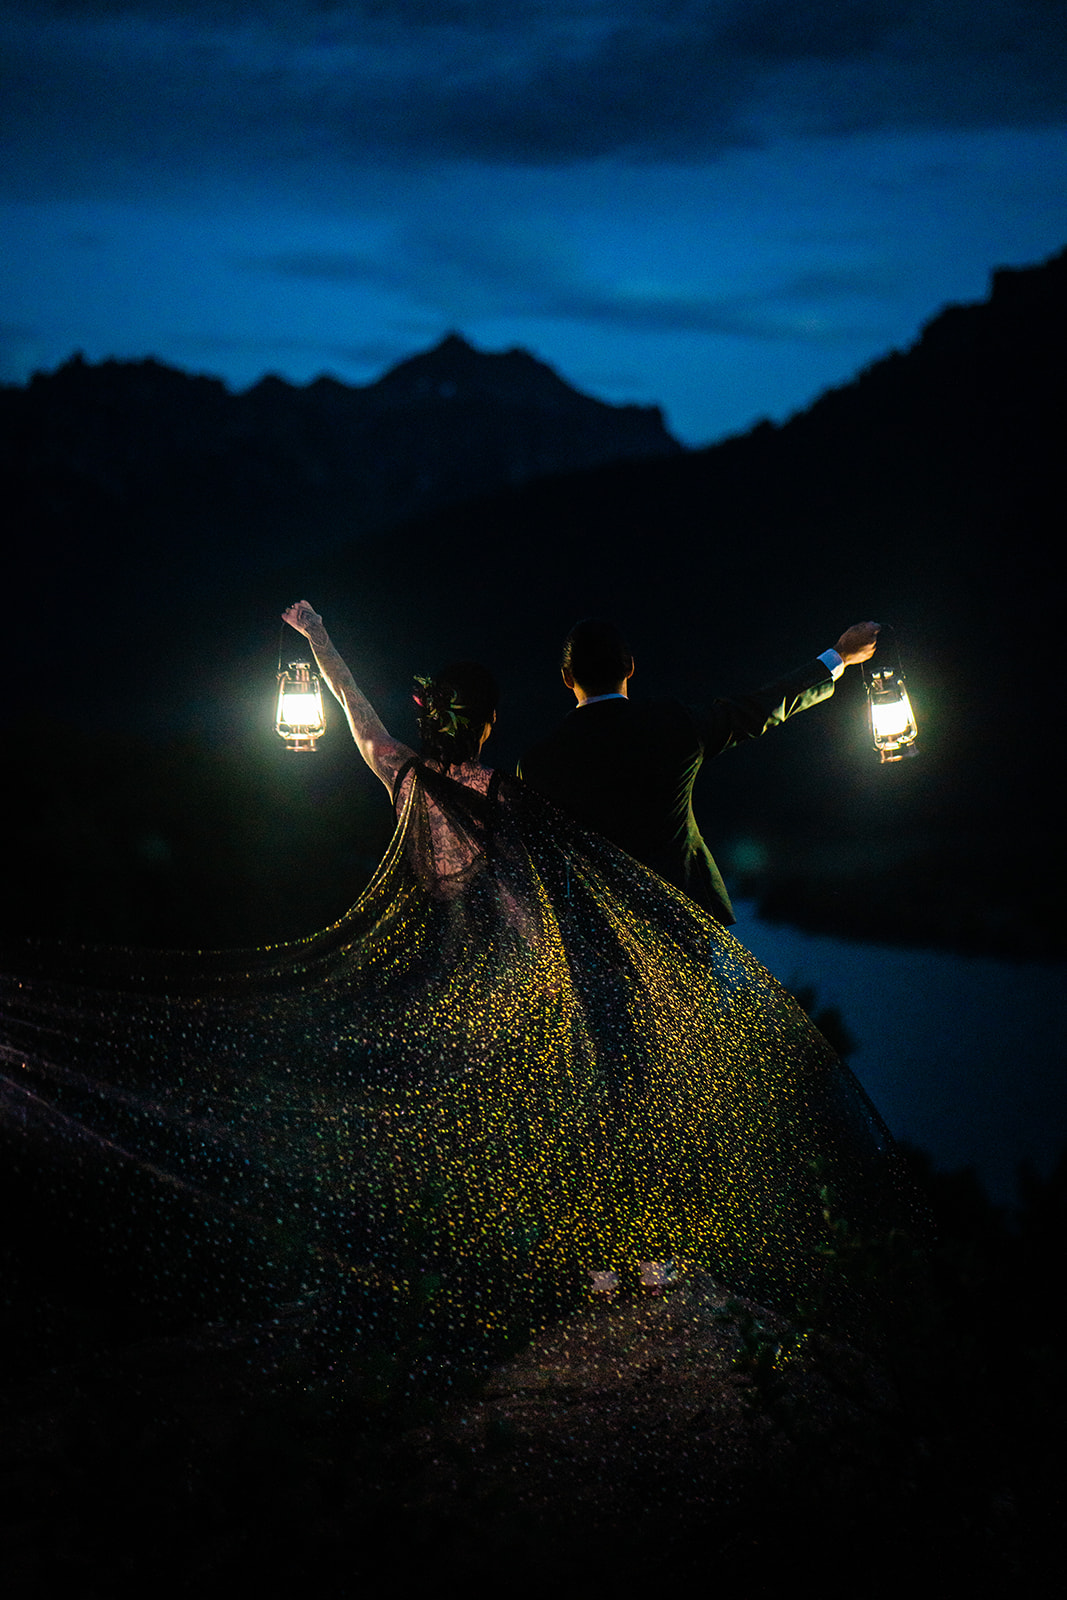 Bride and groom holding lanterns up at night